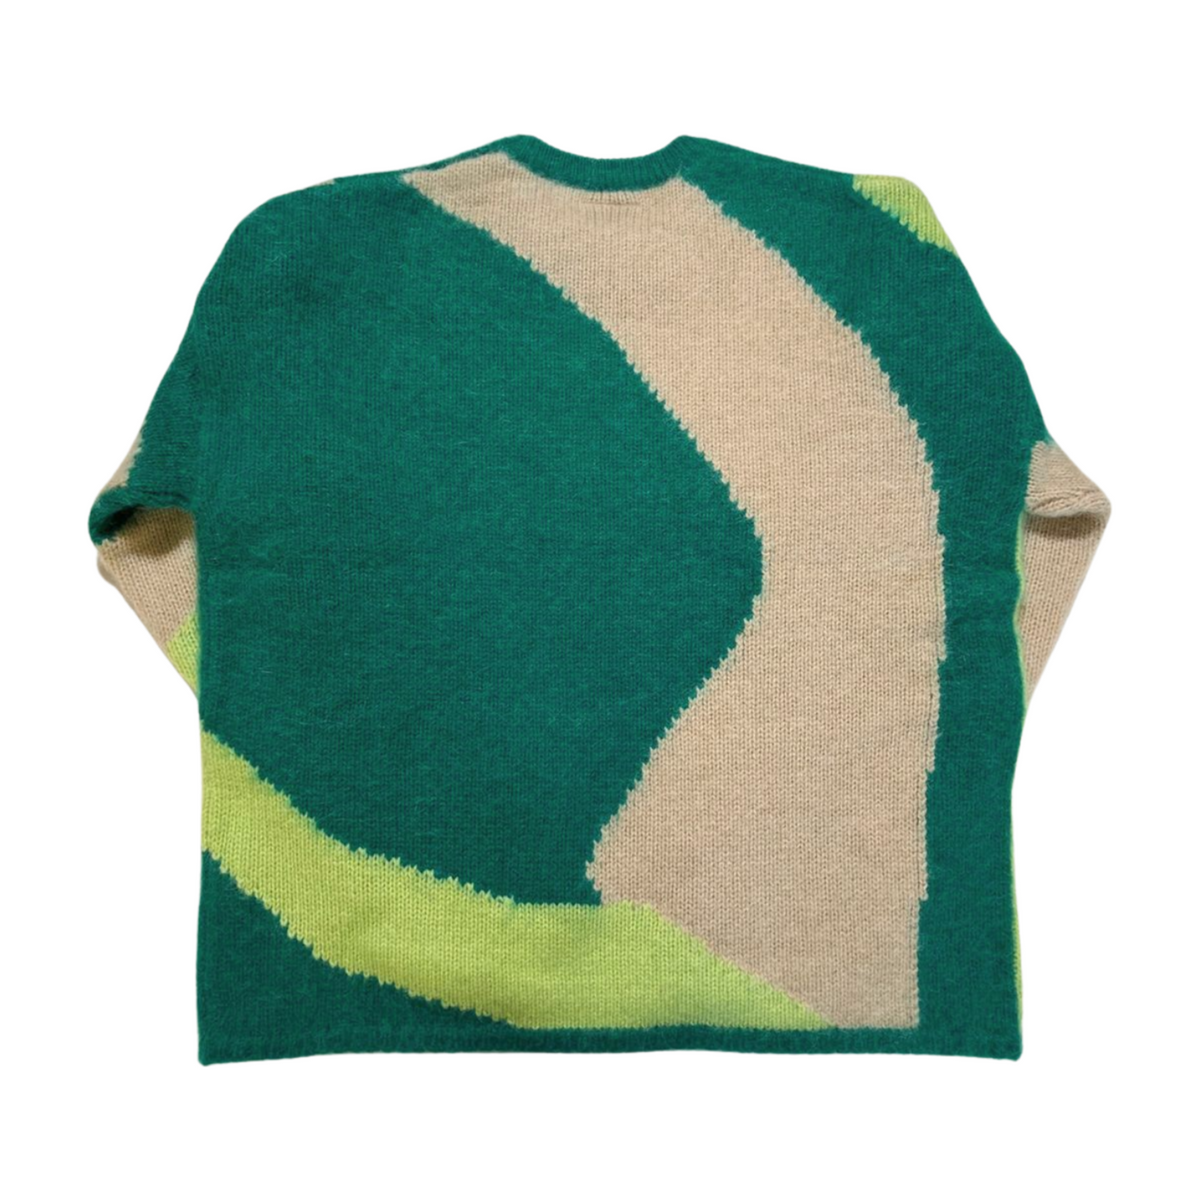 Nagnata- Green "Bowie" Sweater NEW WITH TAGS!